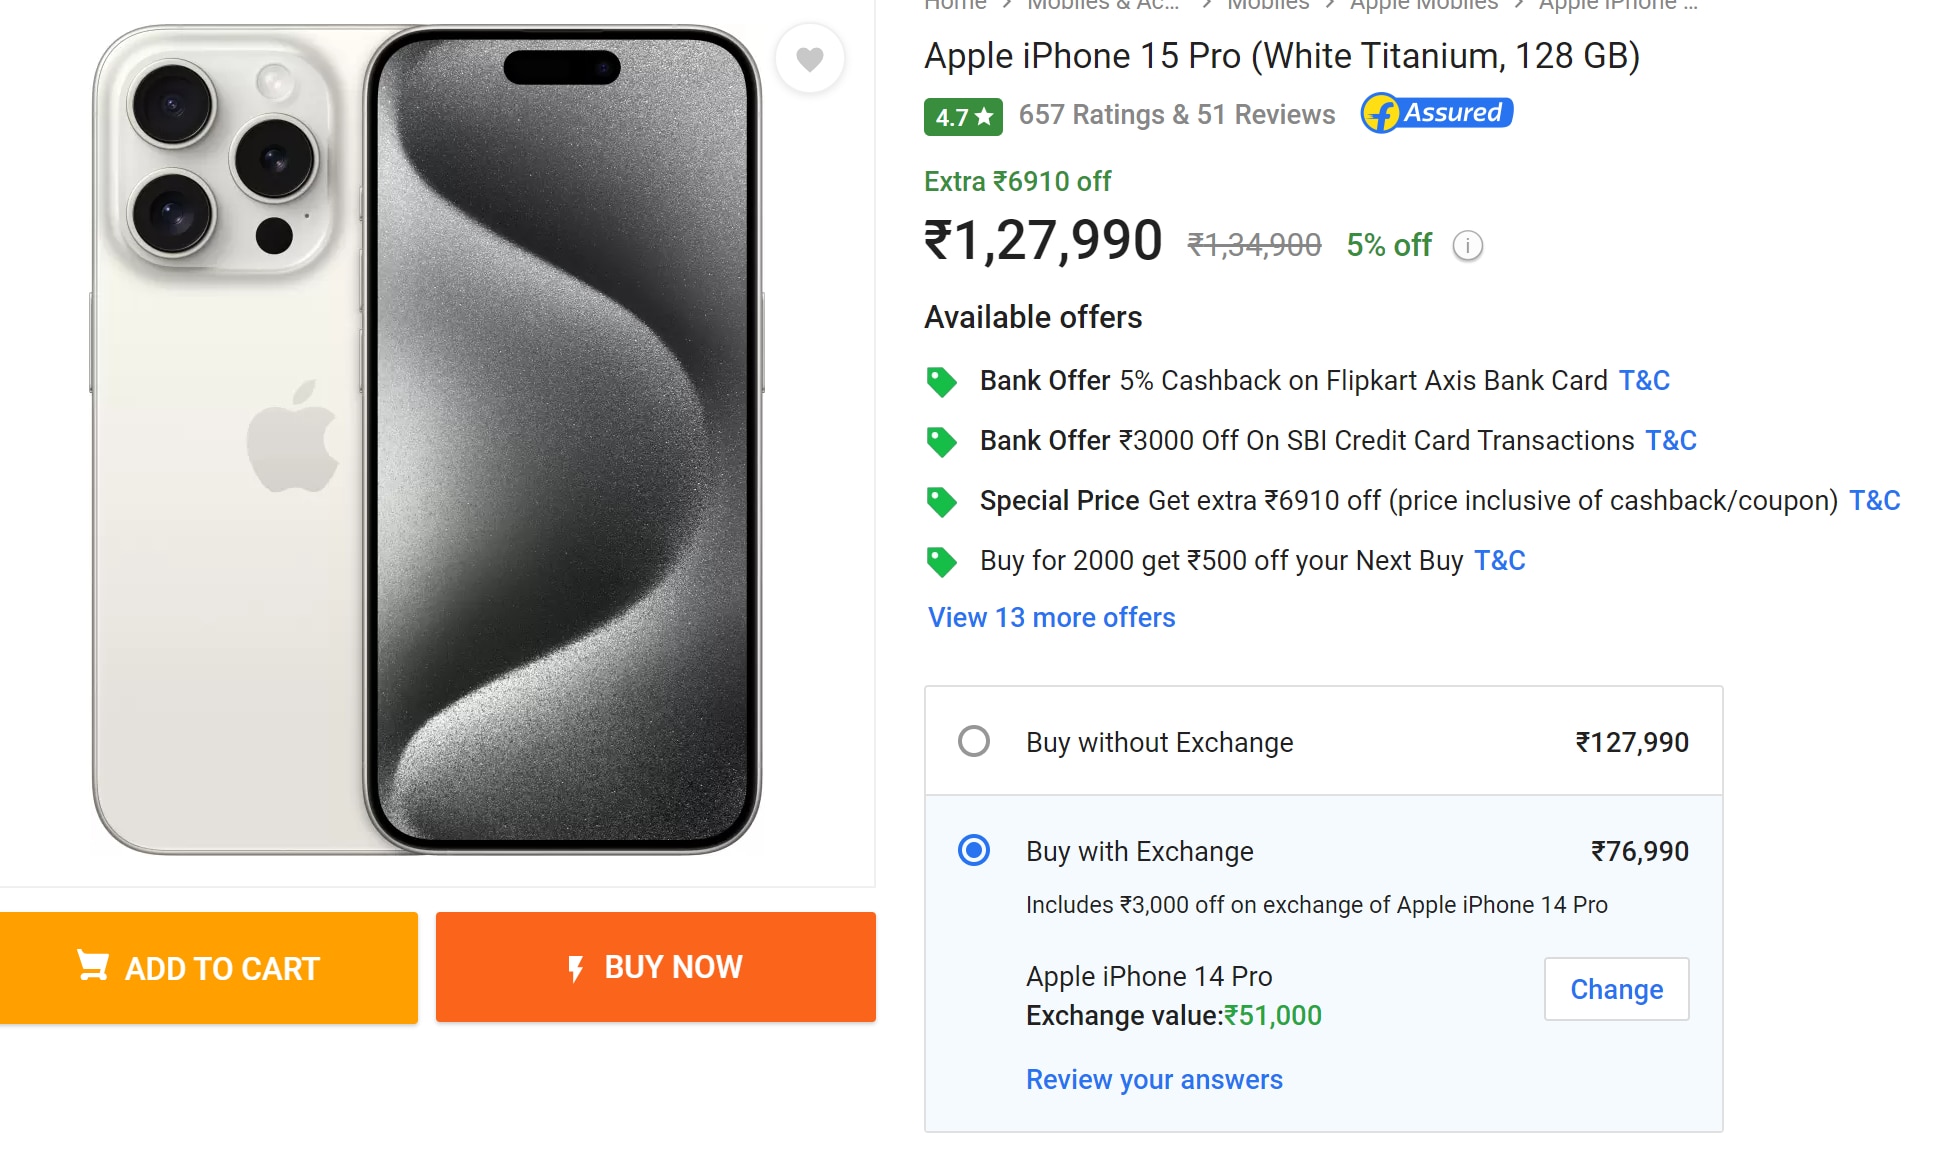 iphone 15 pro available at a discount in india, here is how the deal works